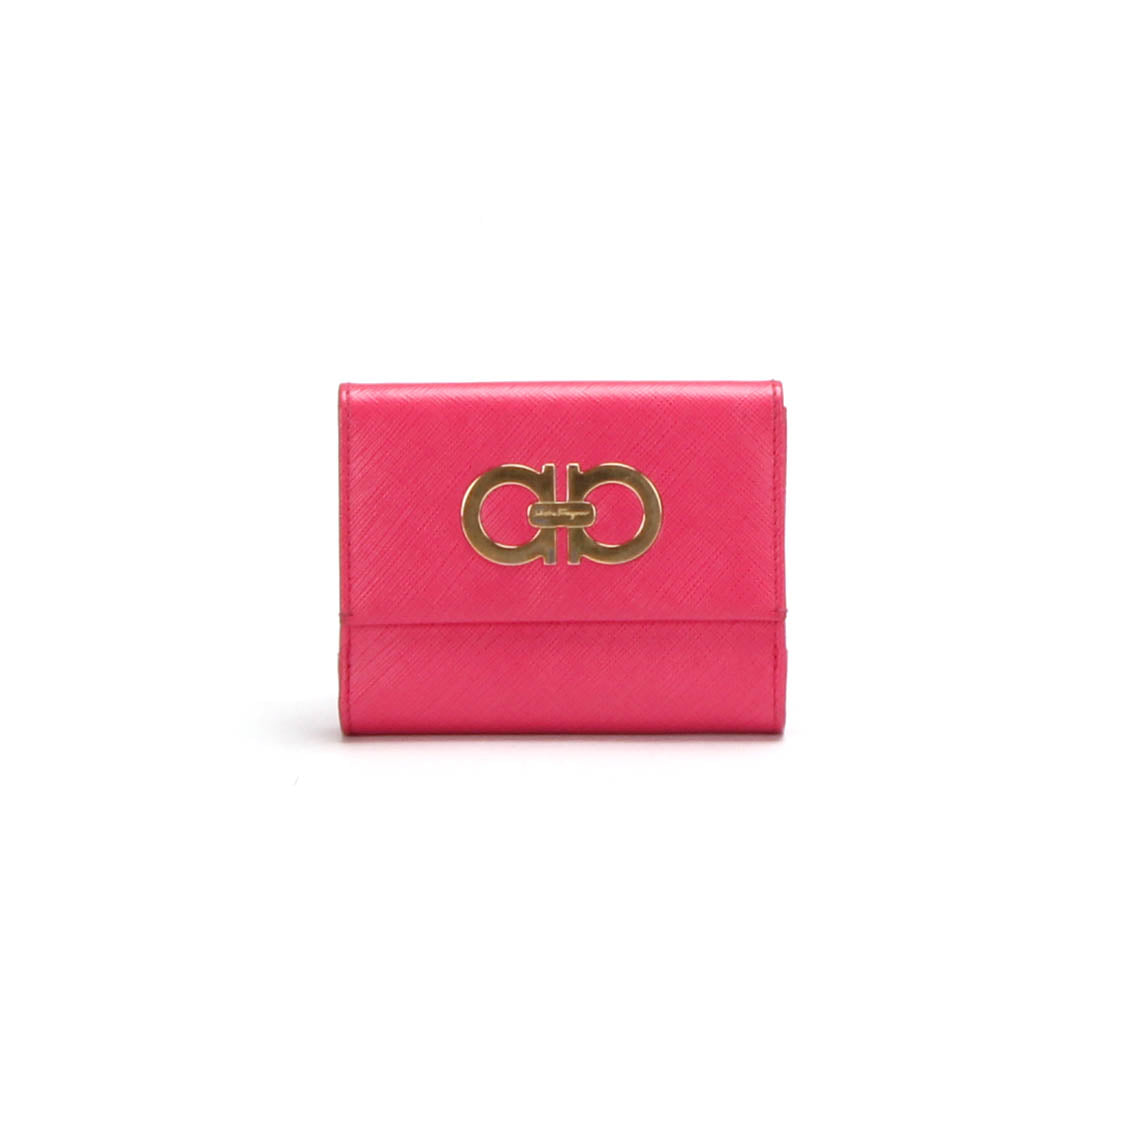 Leather Gancini Compact Wallet IR227122